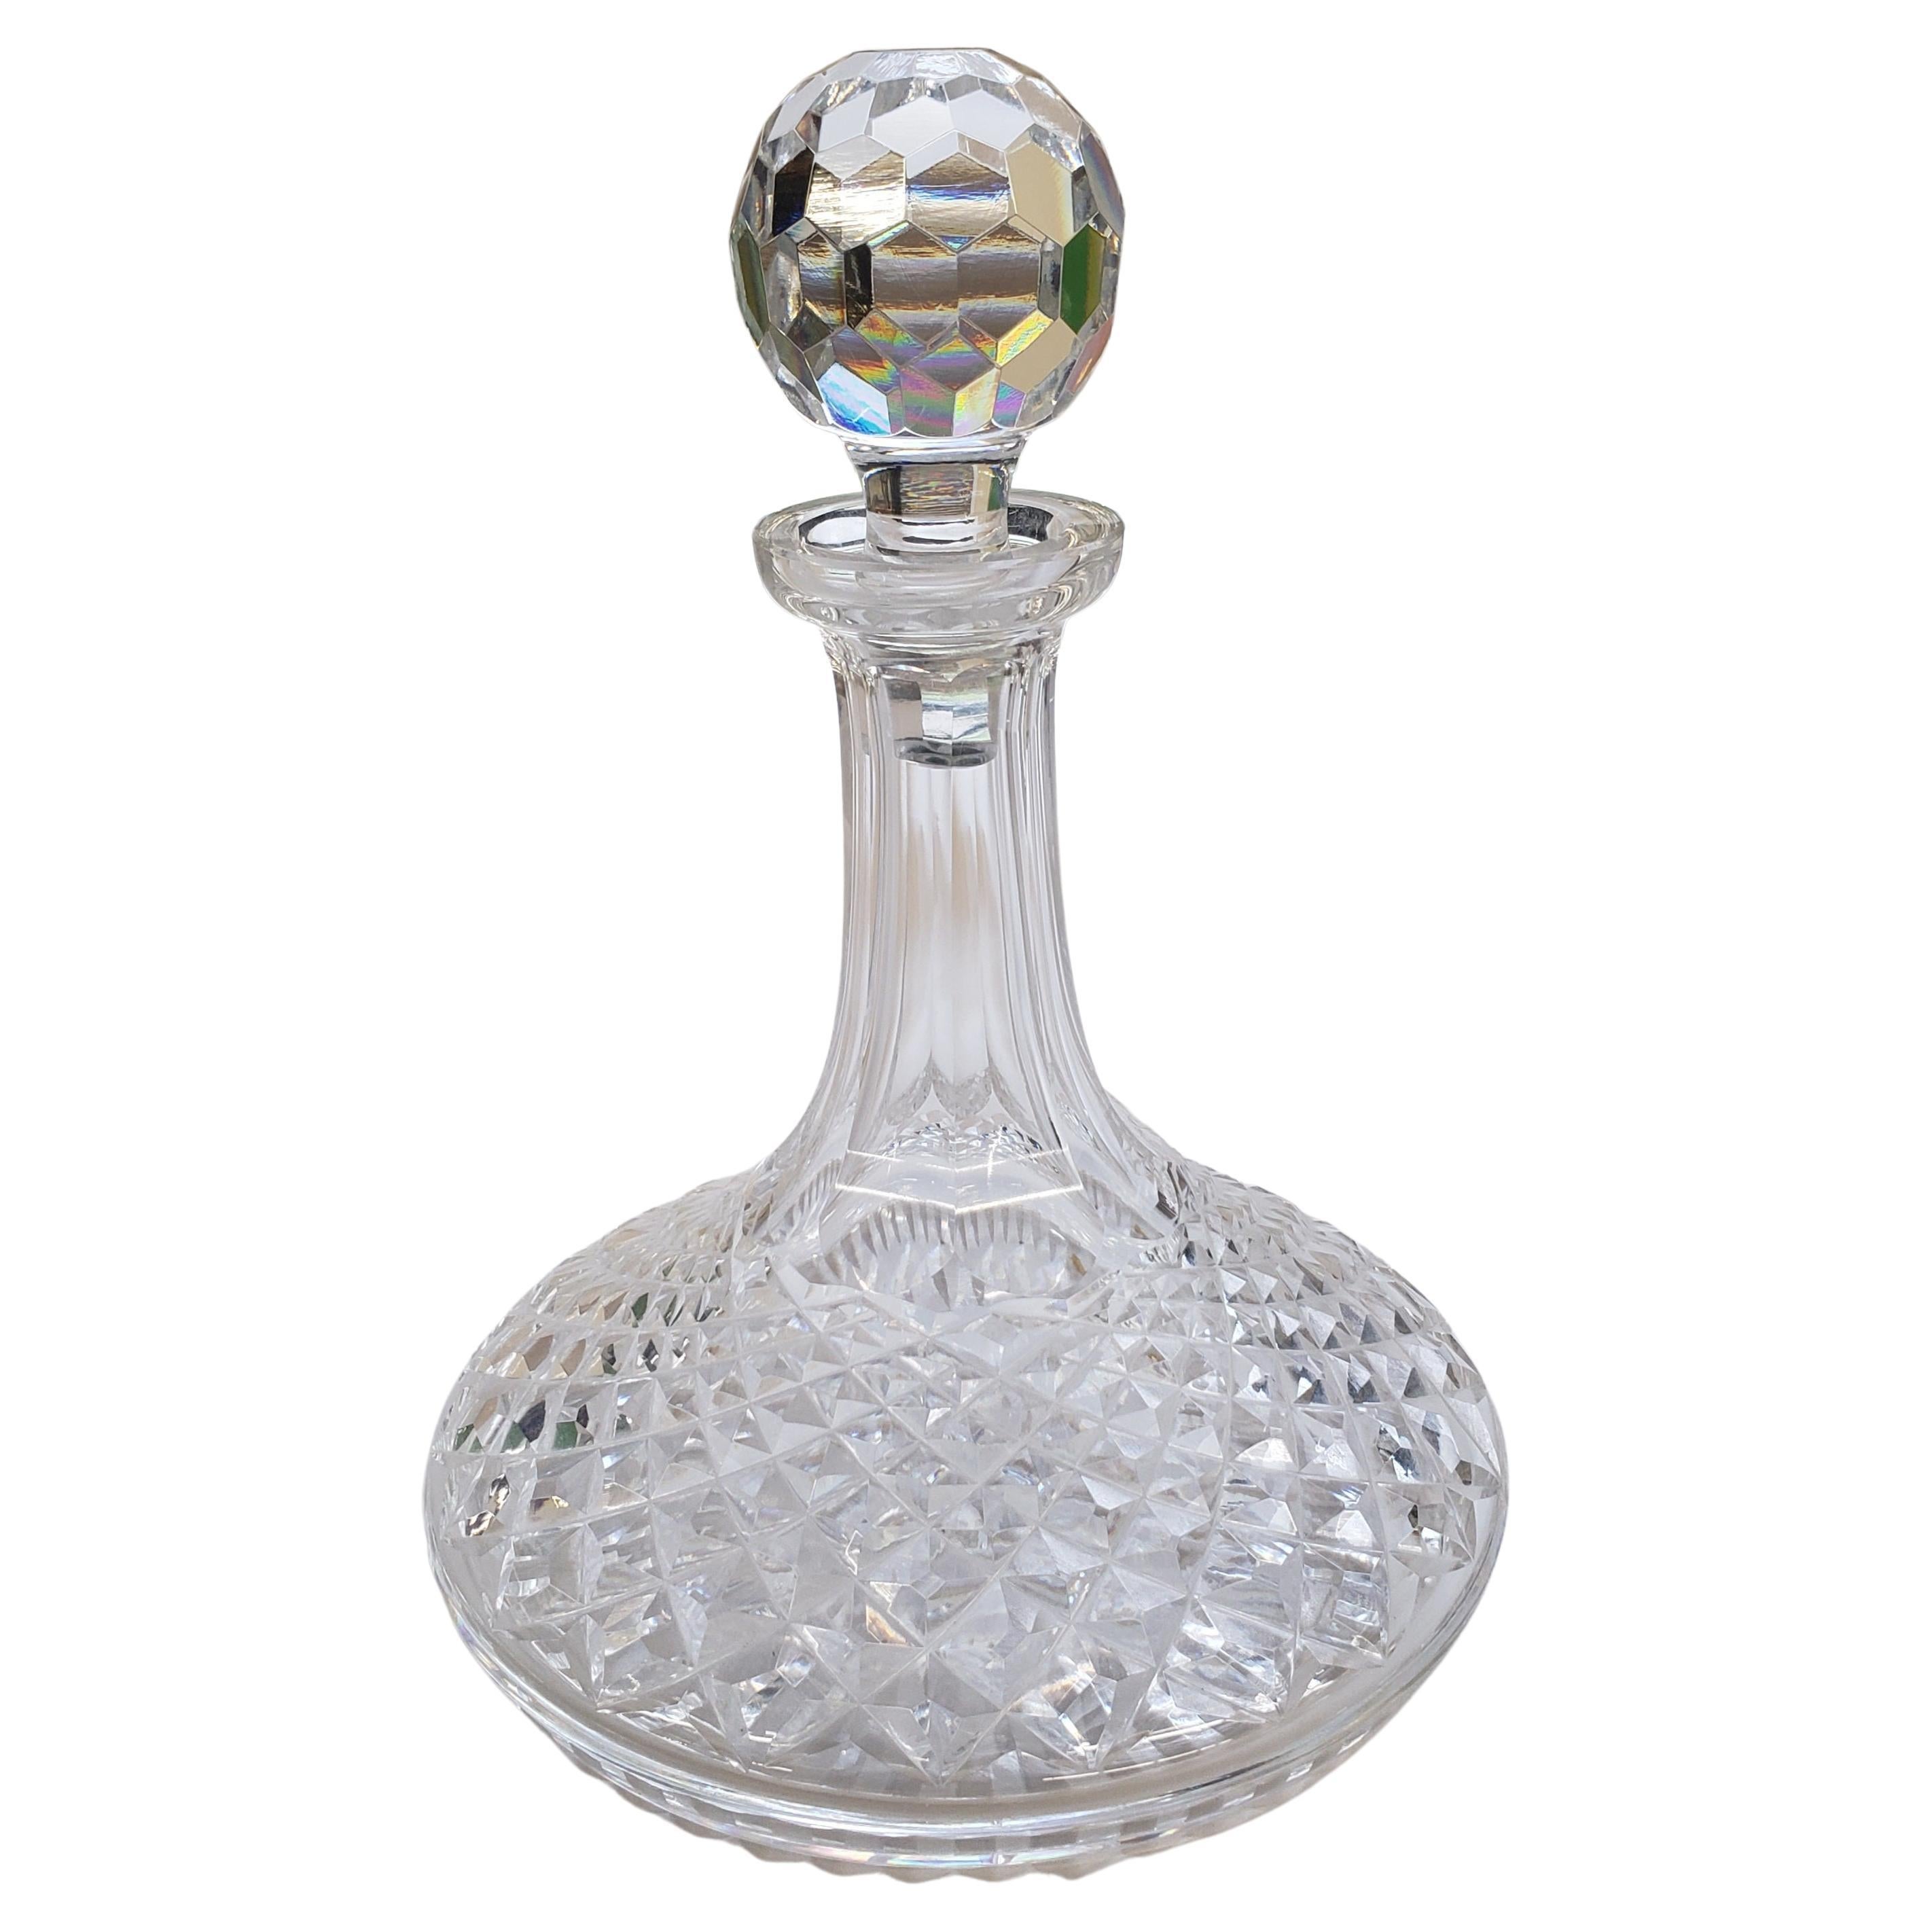 A stunning, rare and discontinued mid-century Ships Decanter and Stopper Alana by Waterford Crystal.
Measures 9